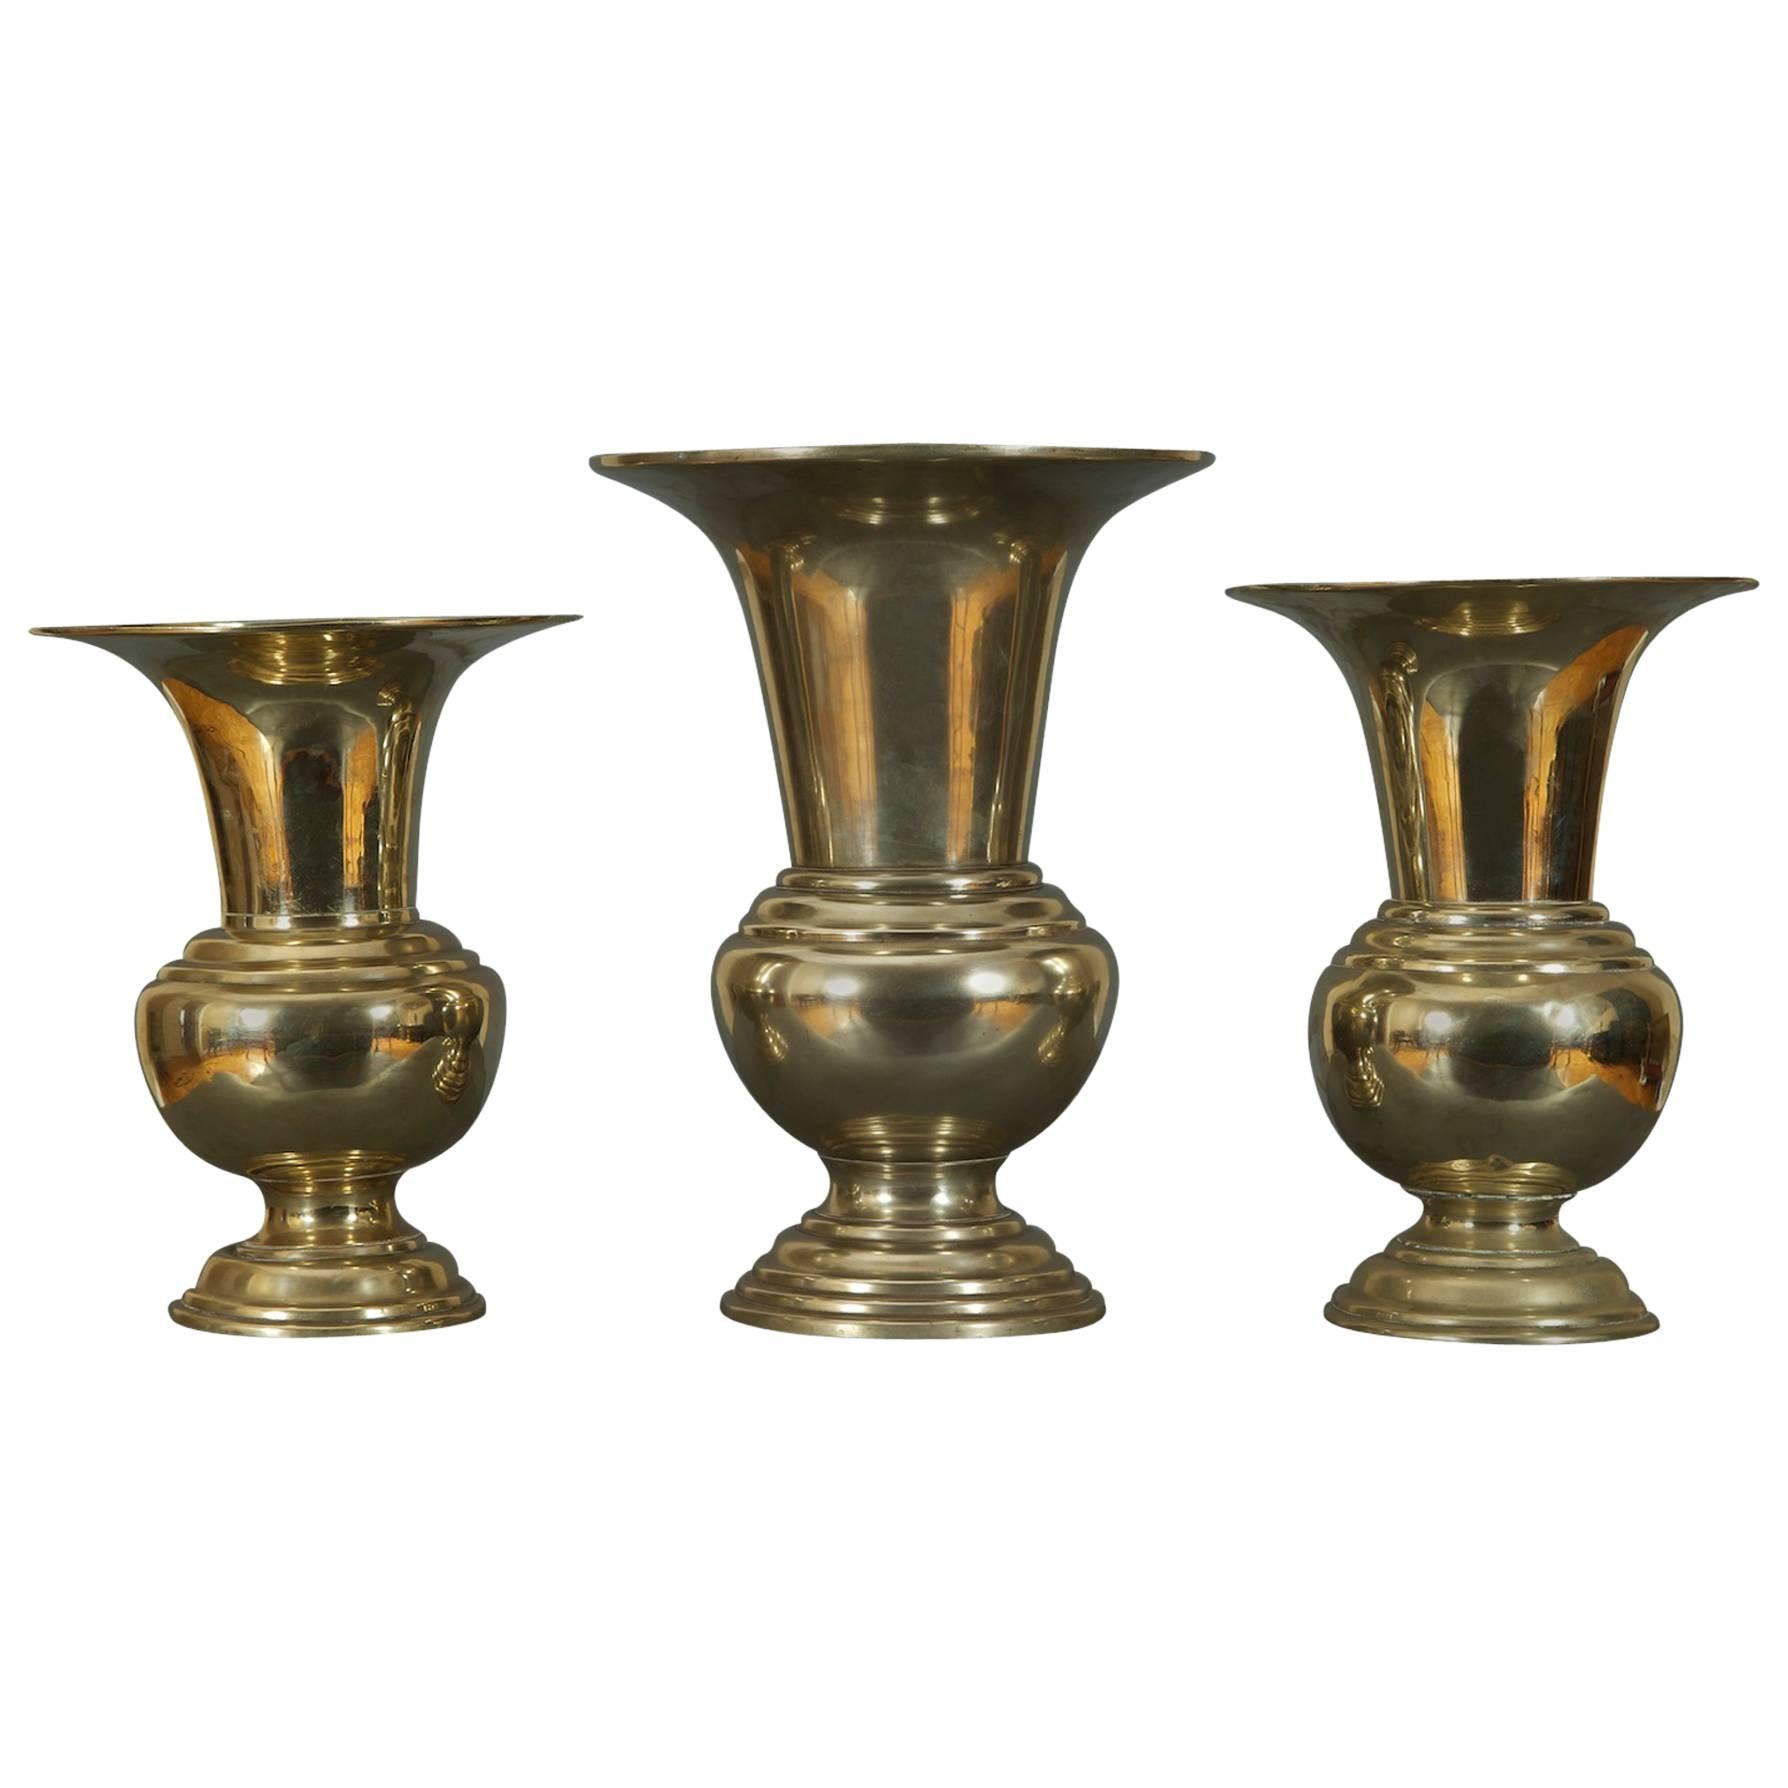 Rare Series of Three Paktong Vases For Sale